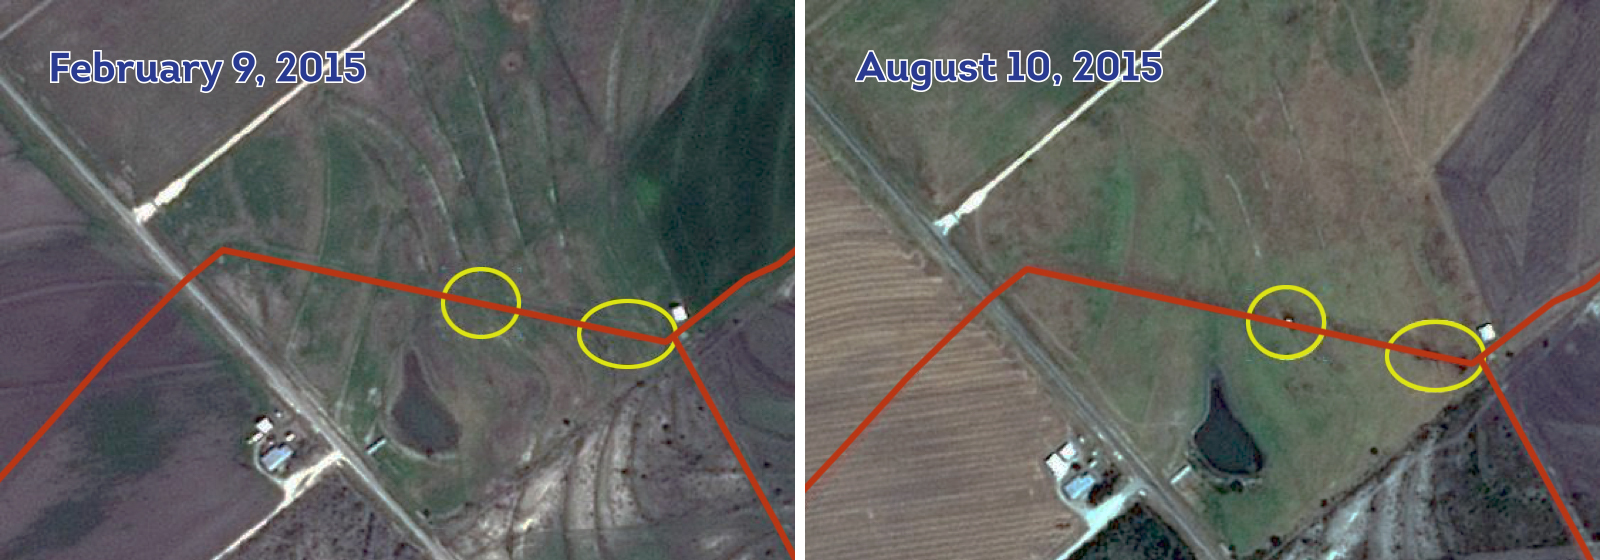 Satelytics applied its techniques to both sets of data and established that there were no leaks in February, but the leaks are clearly visible from satellite imagery captured in August.